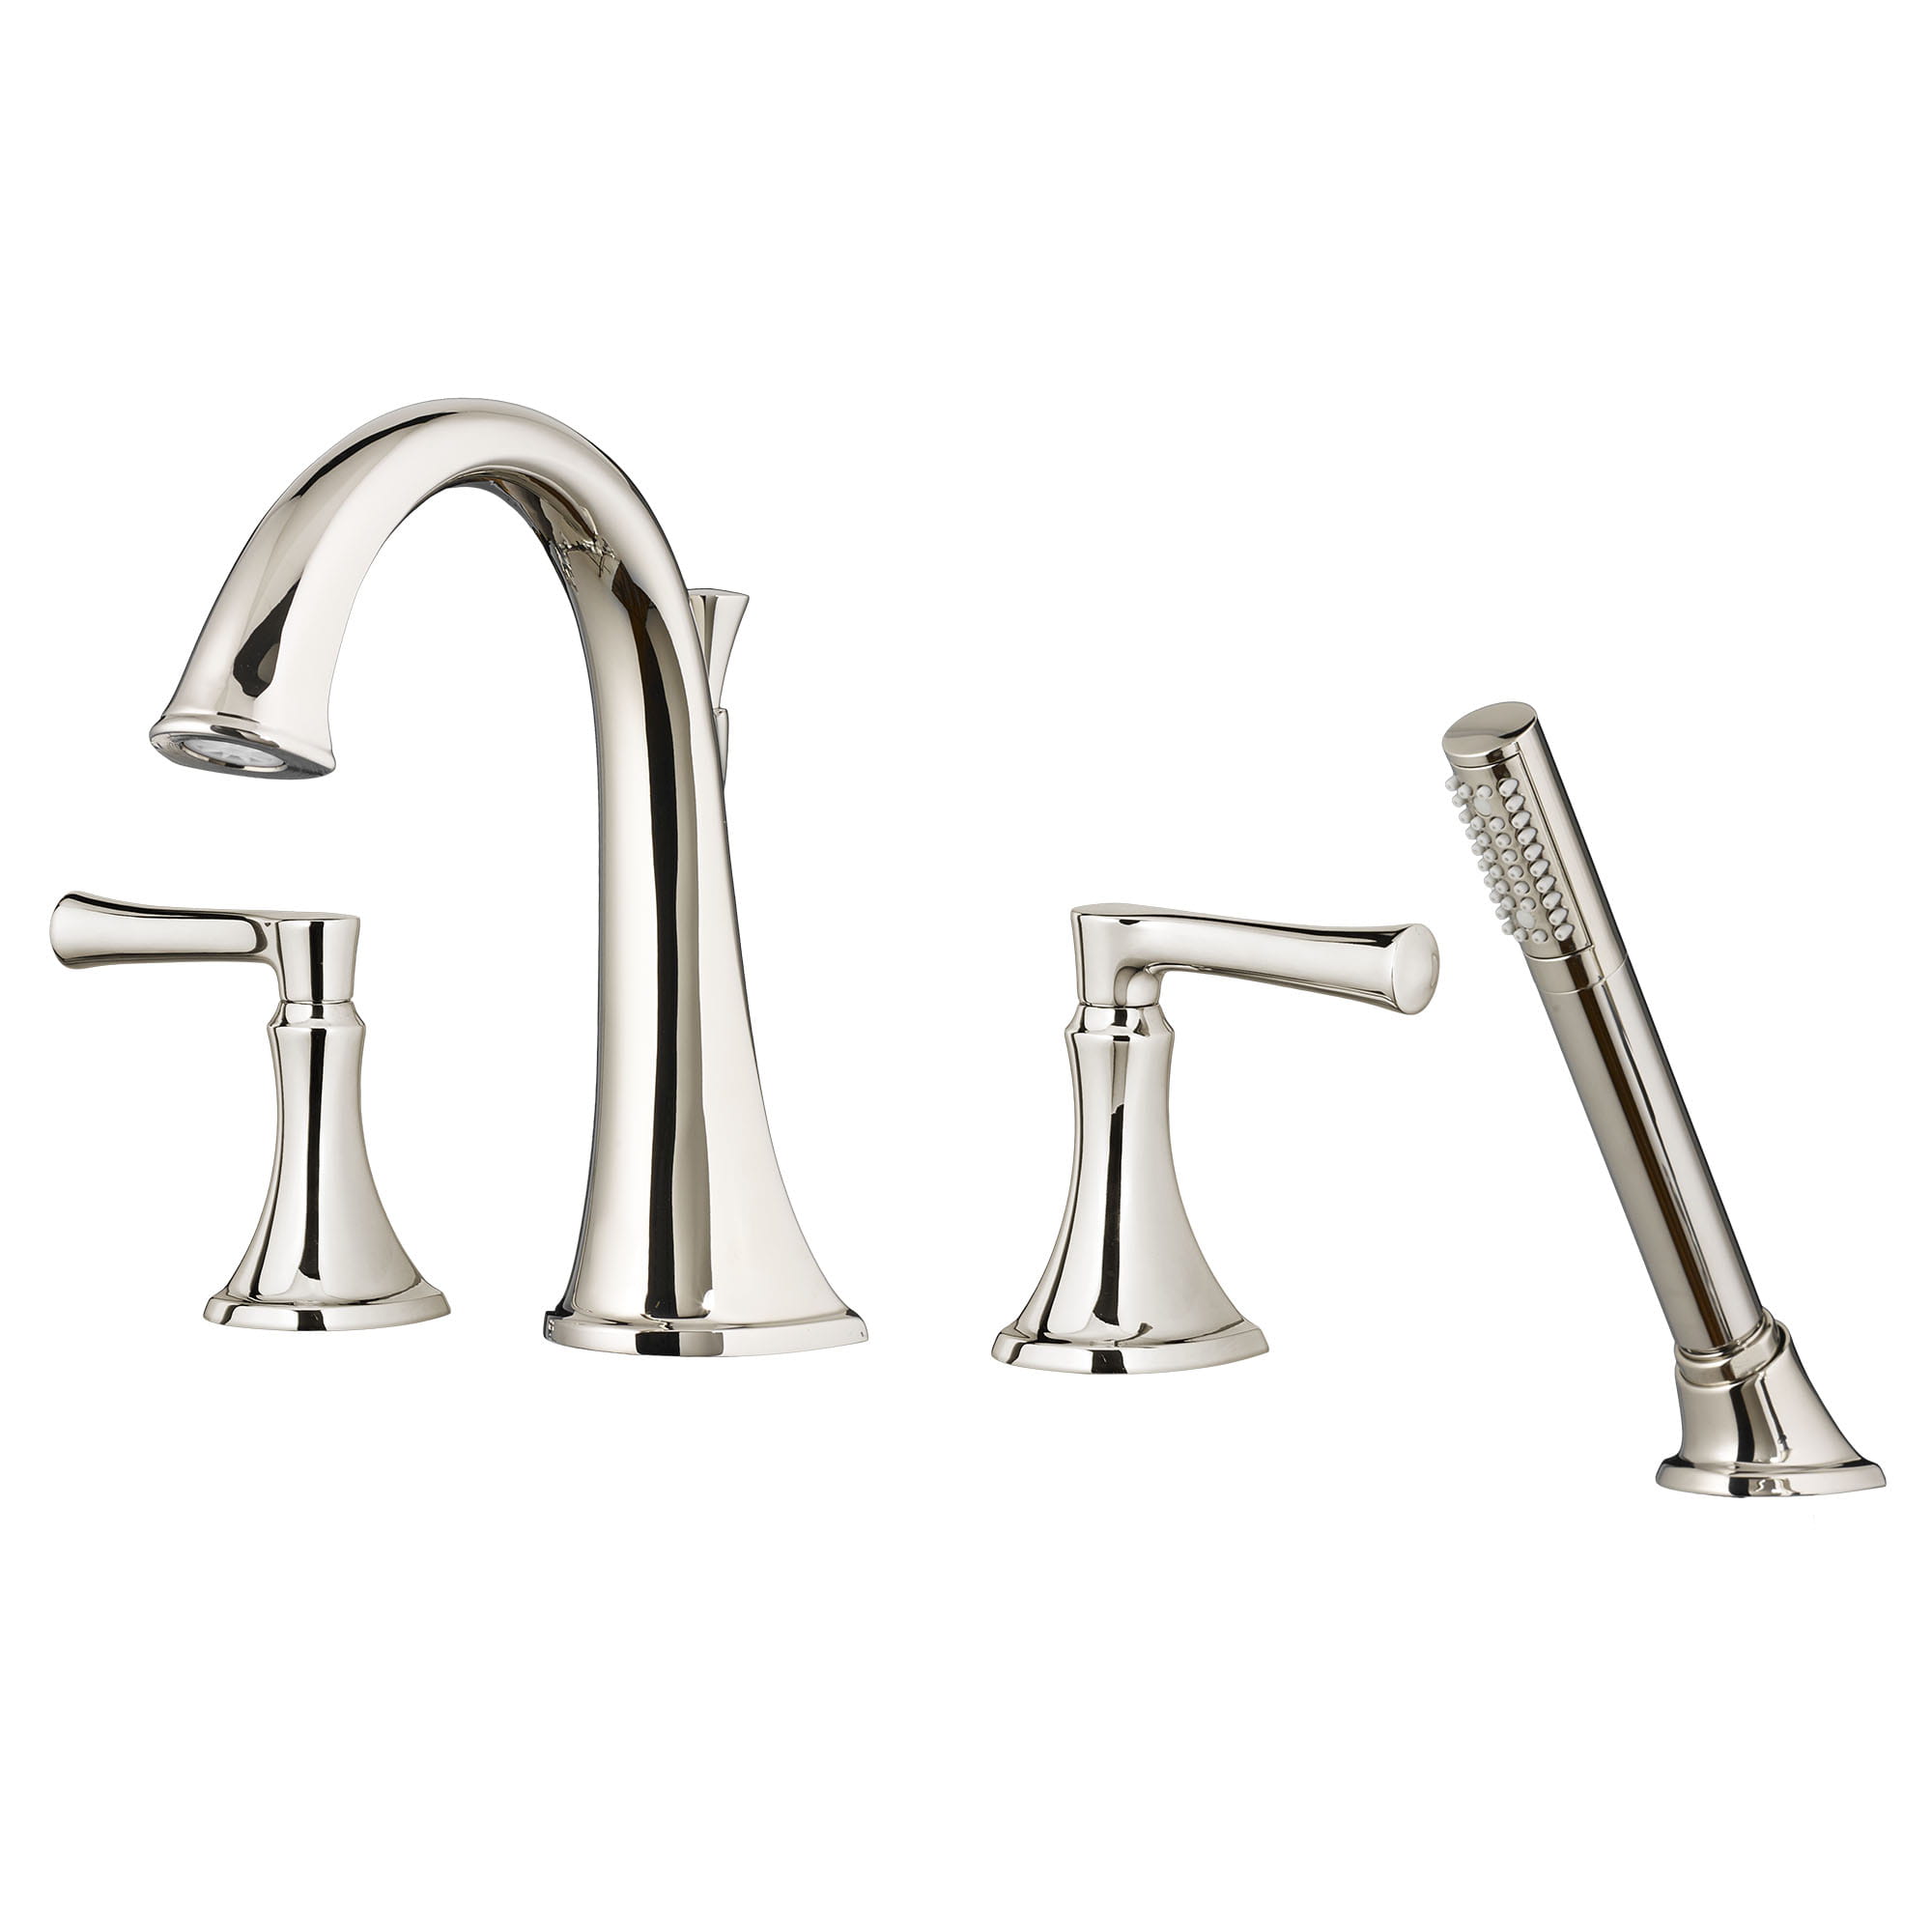 Estate Bathtub Faucet With Personal Shower for Flash Rough In Valve With Lever Handles POLISHED  NICKEL